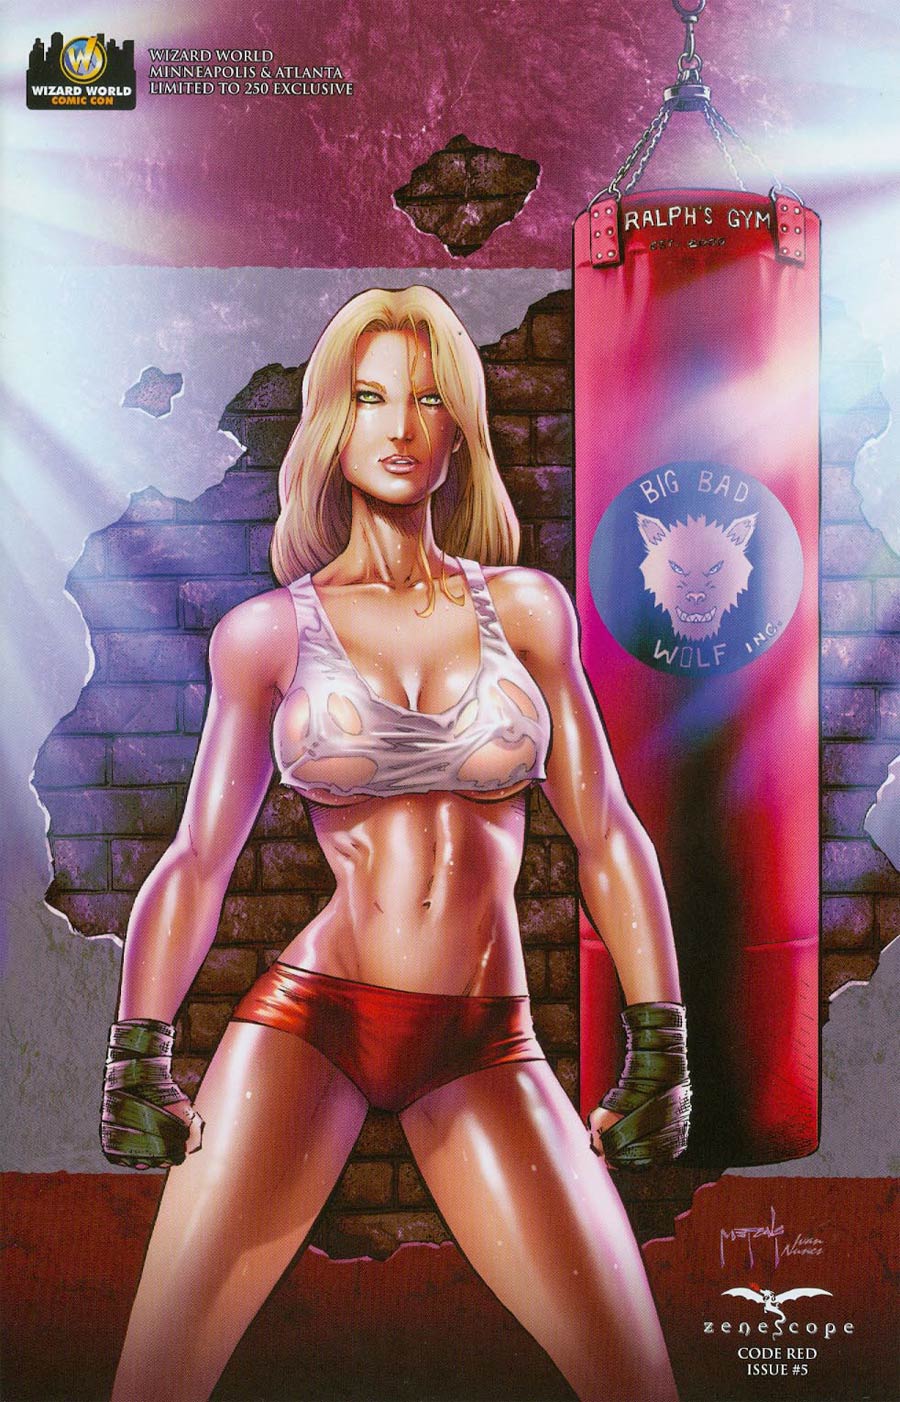 Grimm Fairy Tales Presents Code Red #5 Cover F Wizard World Minneapolis & Atlanta Exclusive Jason Metcalf White Tank Top Variant Cover (Age Of Darknes